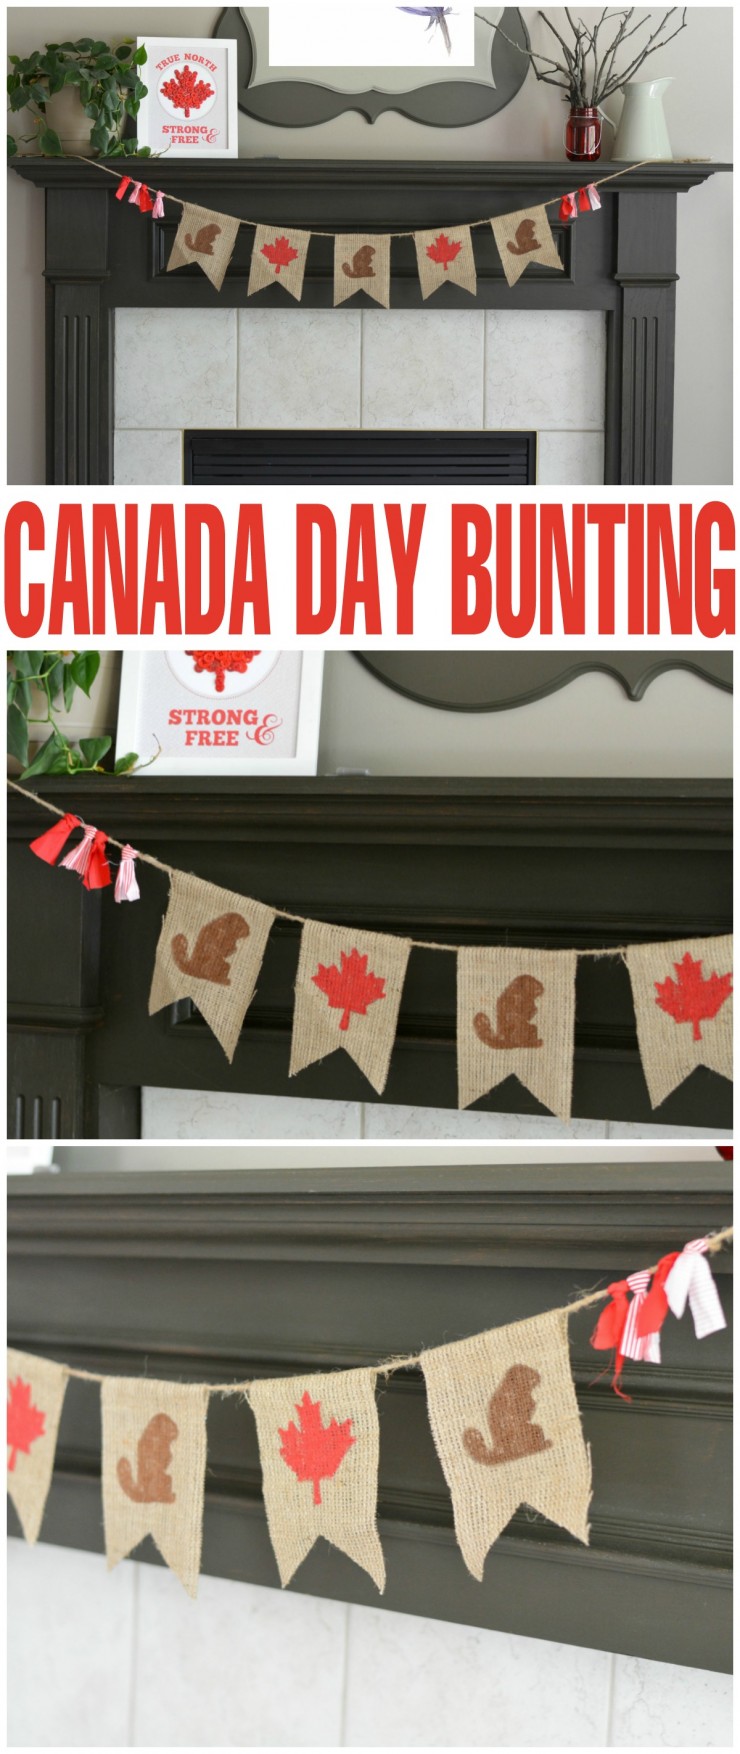 Celebrate Canada Day this year with an easy to make DIY patriotic decor project: Canada Day Bunting with a free printable template.